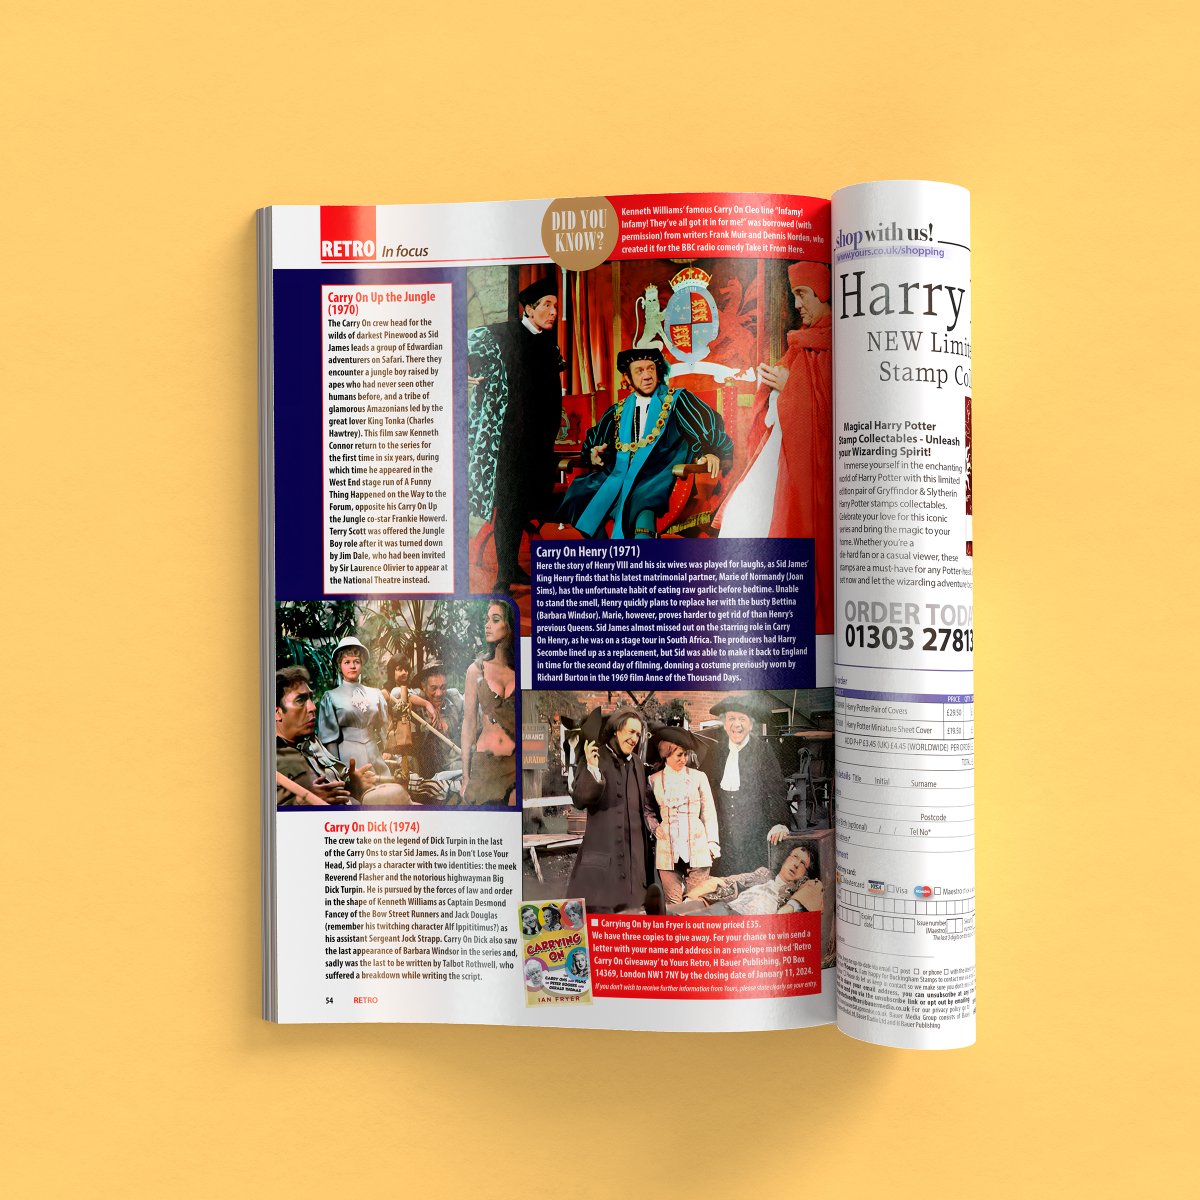 📰🖋️Ian Fryer's absolutely superb '@CARRYING ON: THE CARRY ONS AND @FILMS OF PETER ROGERS AND GERALD THOMAS' is featured across 4 pages in this month's edition of @RetroYours - check it out! Book info👉🏼 fml.pub/carry-on #carryon #britishcomedy #carryonfilms #carryons